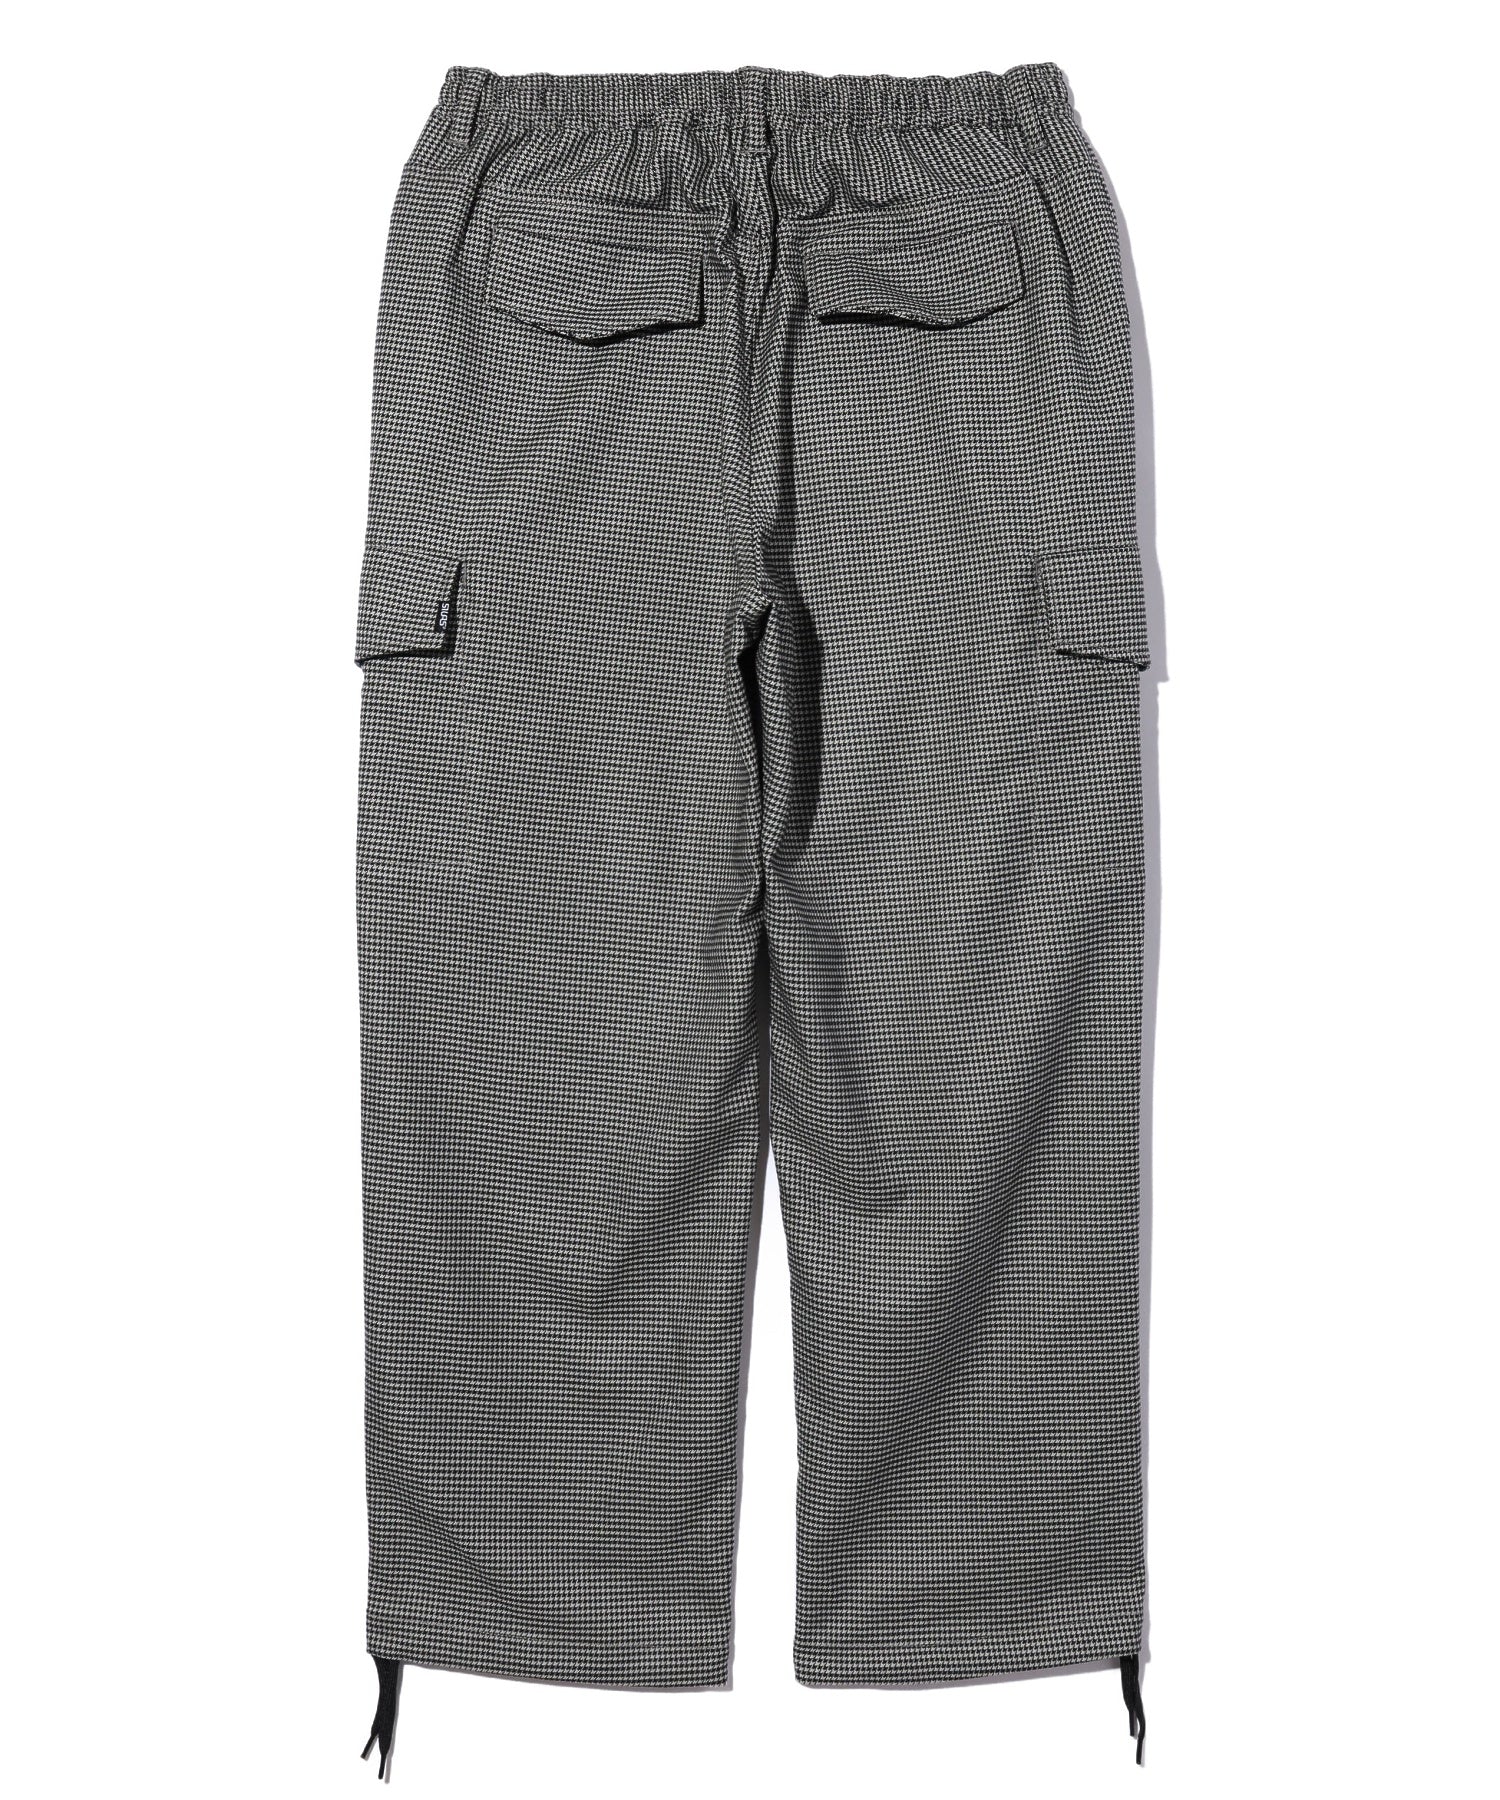 HOUNDSTOOTH PATTERN CARGO PANTS